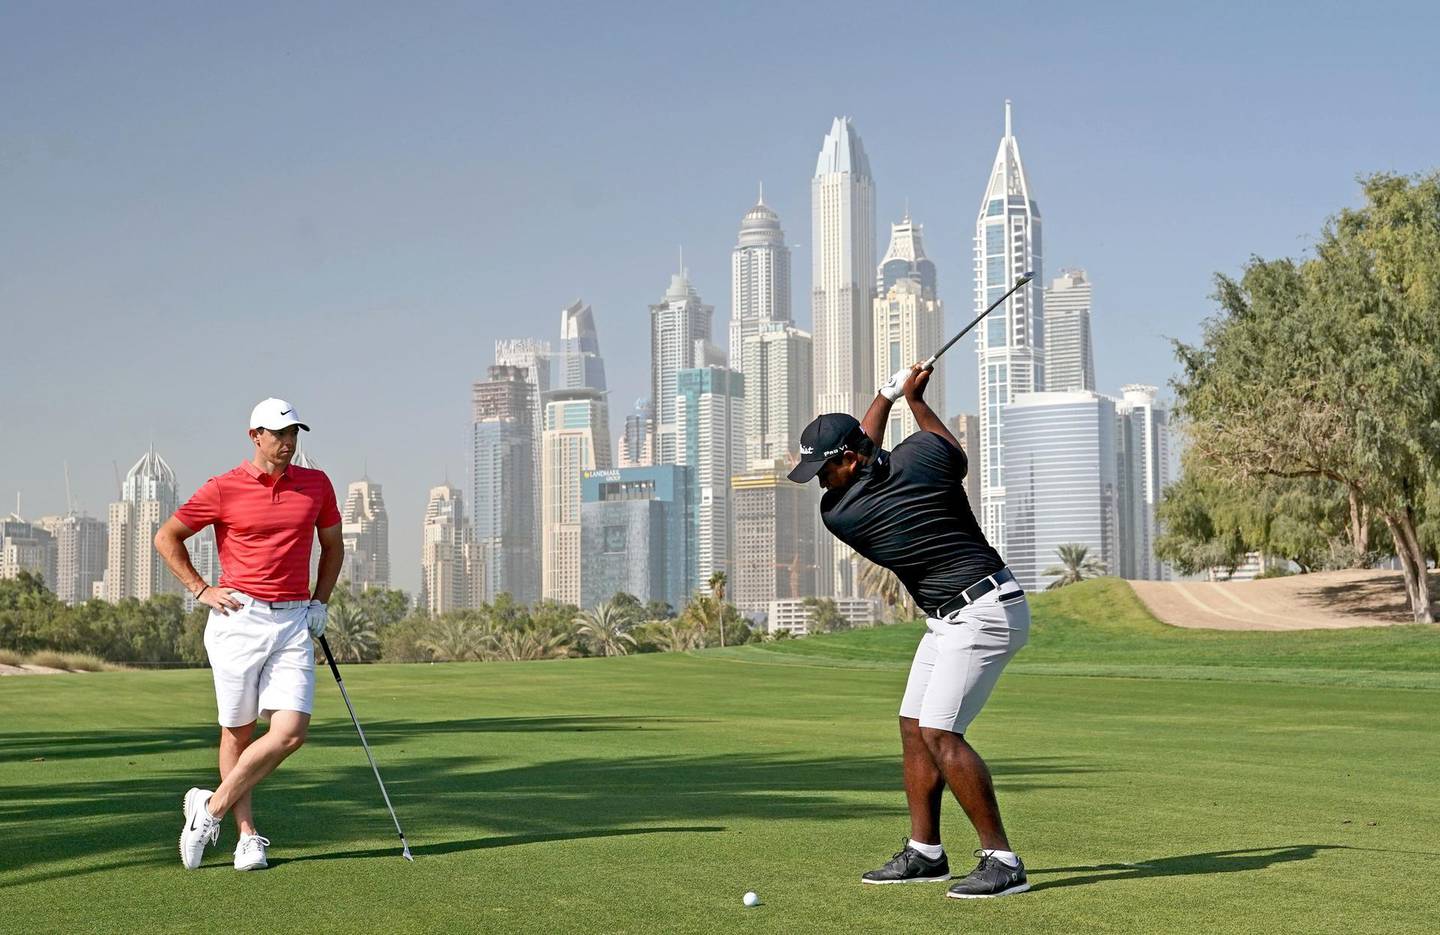 DUBAI, UNITED ARAB EMIRATES - JANUARY 23: Rayhan Thomas of India plays his second shot on the par 5, 13th hole watched by Rory McIlroy of Northern Ireland as a preview for the Omega Dubai Desert Classic on the Majlis Course at The Emirates Golf Club on January 23, 2018 in Dubai, United Arab Emirates.  (Photo by David Cannon/Getty Images)